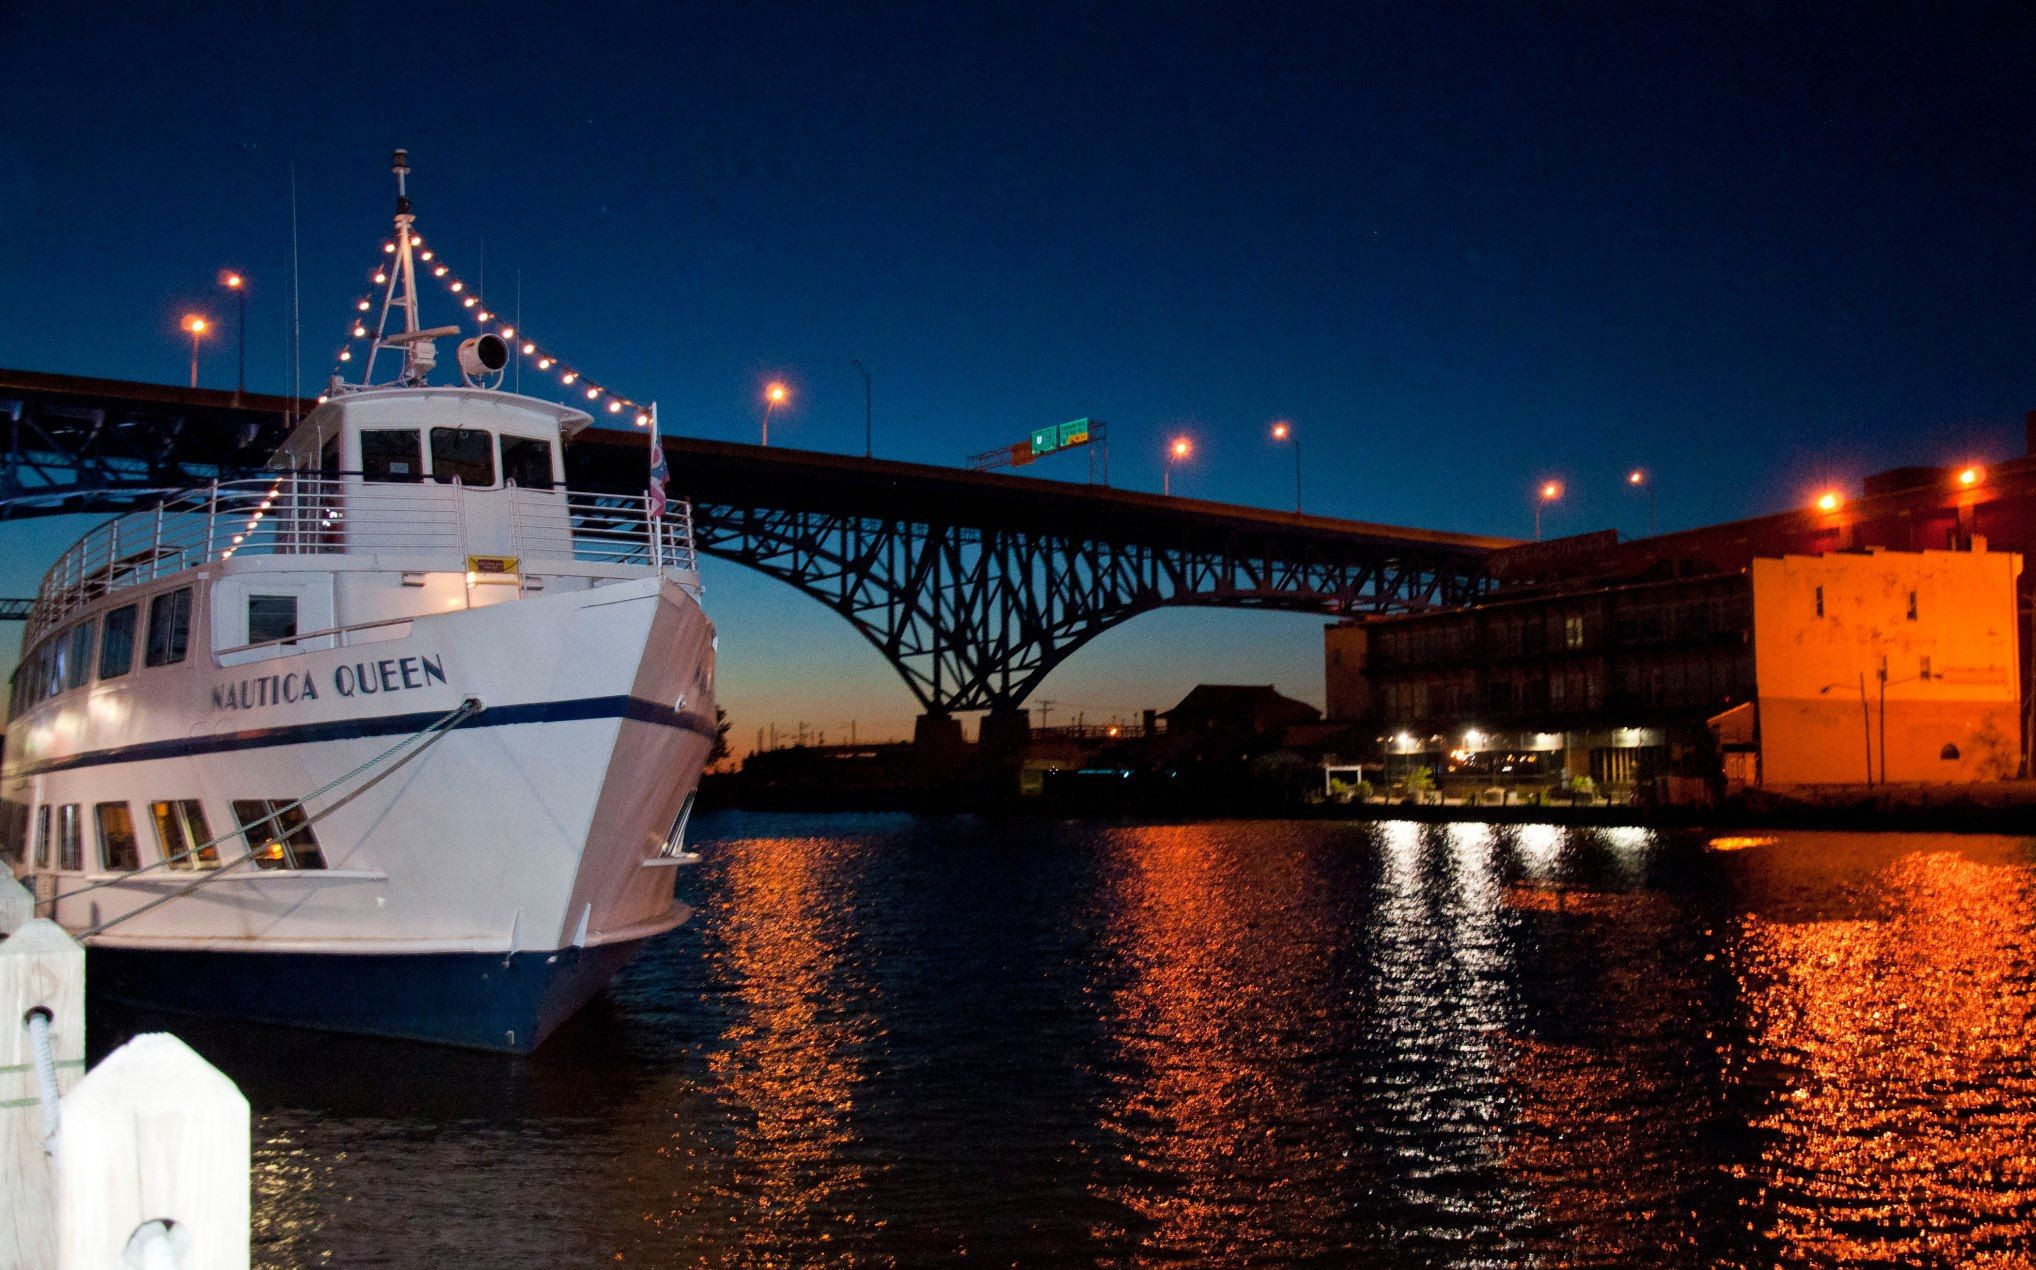 Cleveland Dinner Cruise New Twilight Dinner Cruise In Ohio the Nautica Queen In Cleveland